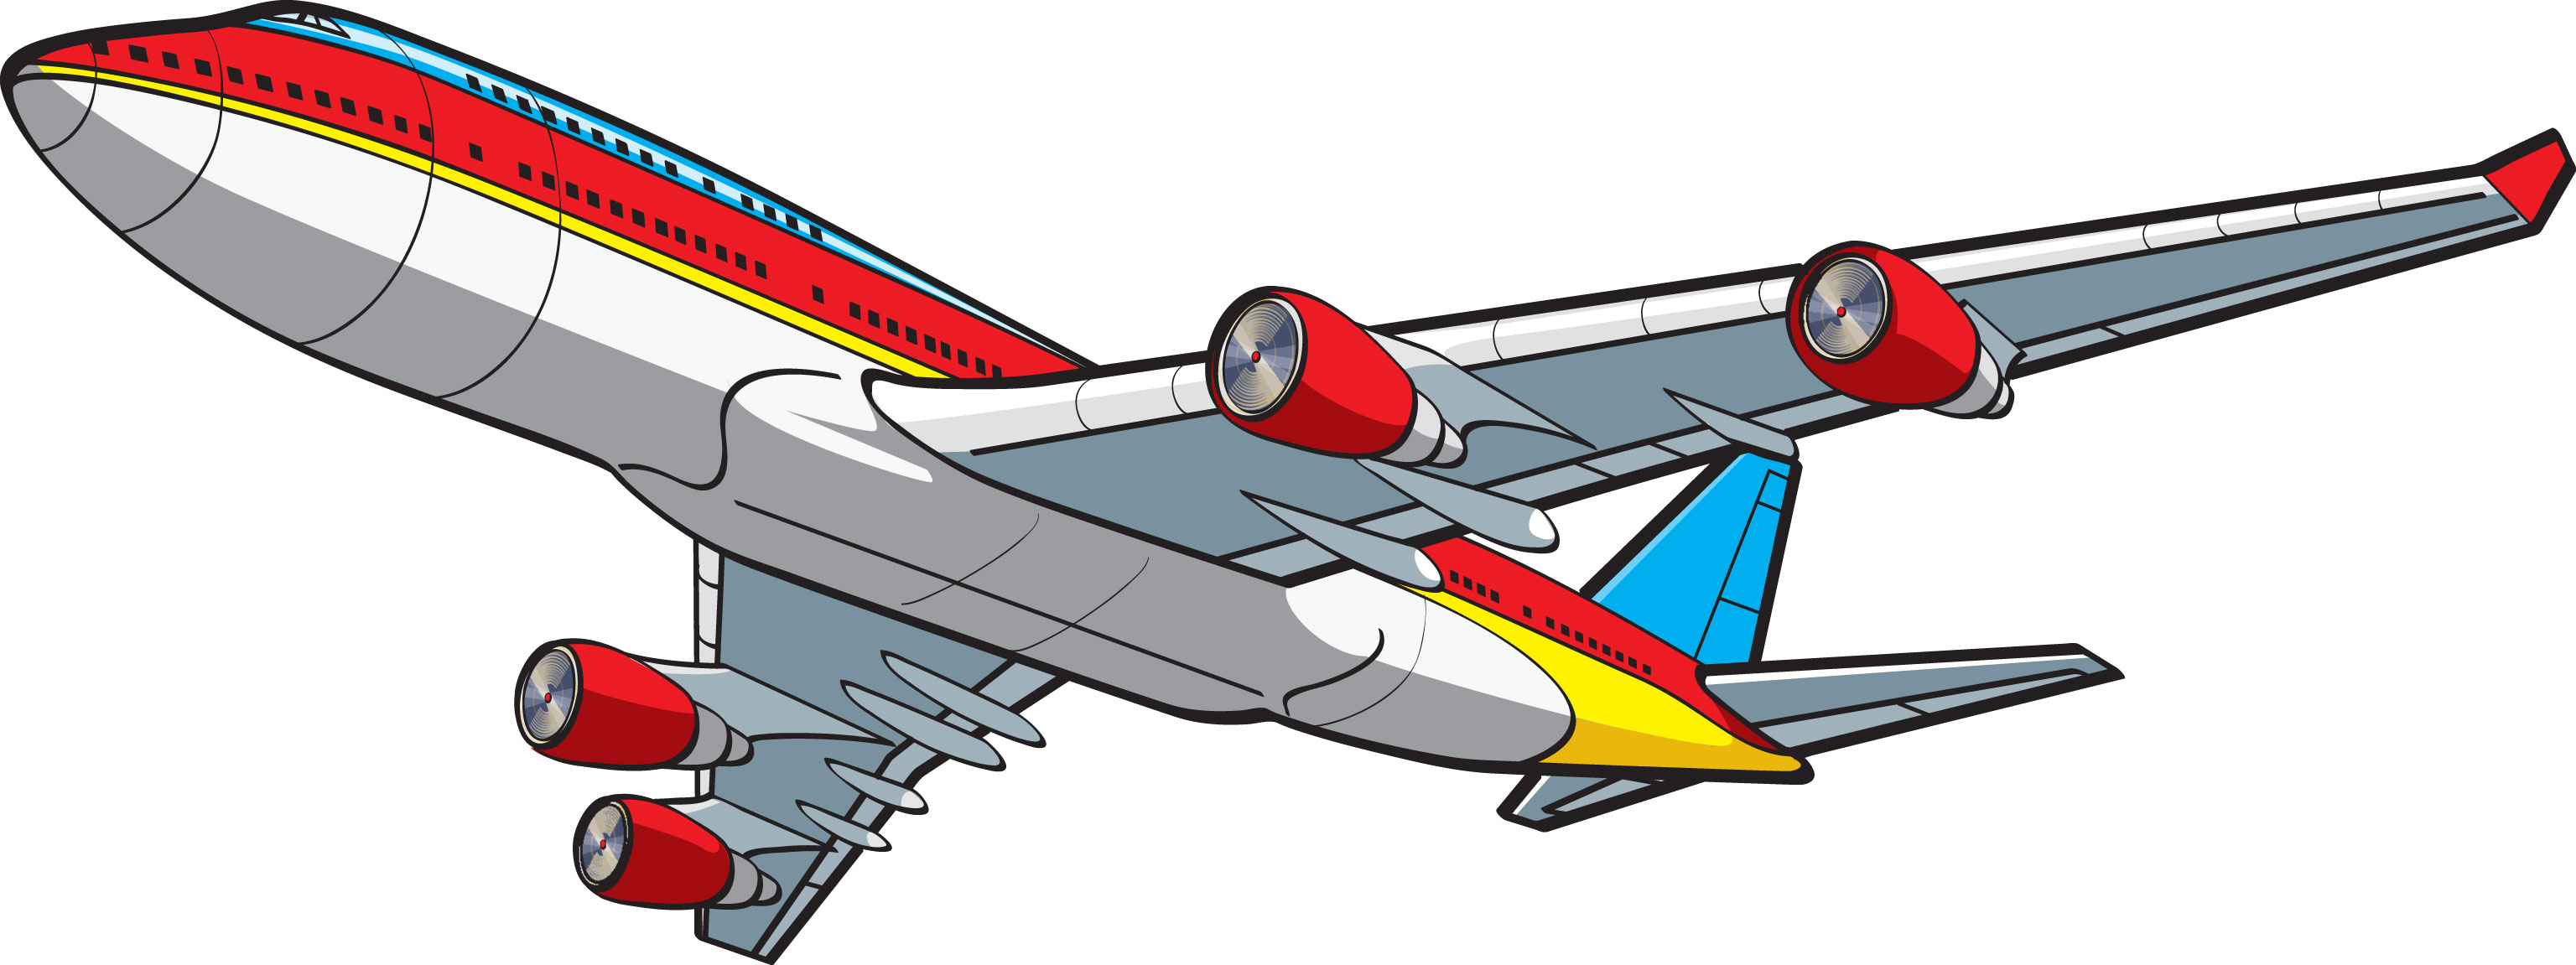 airplane clipart no background - photo #45